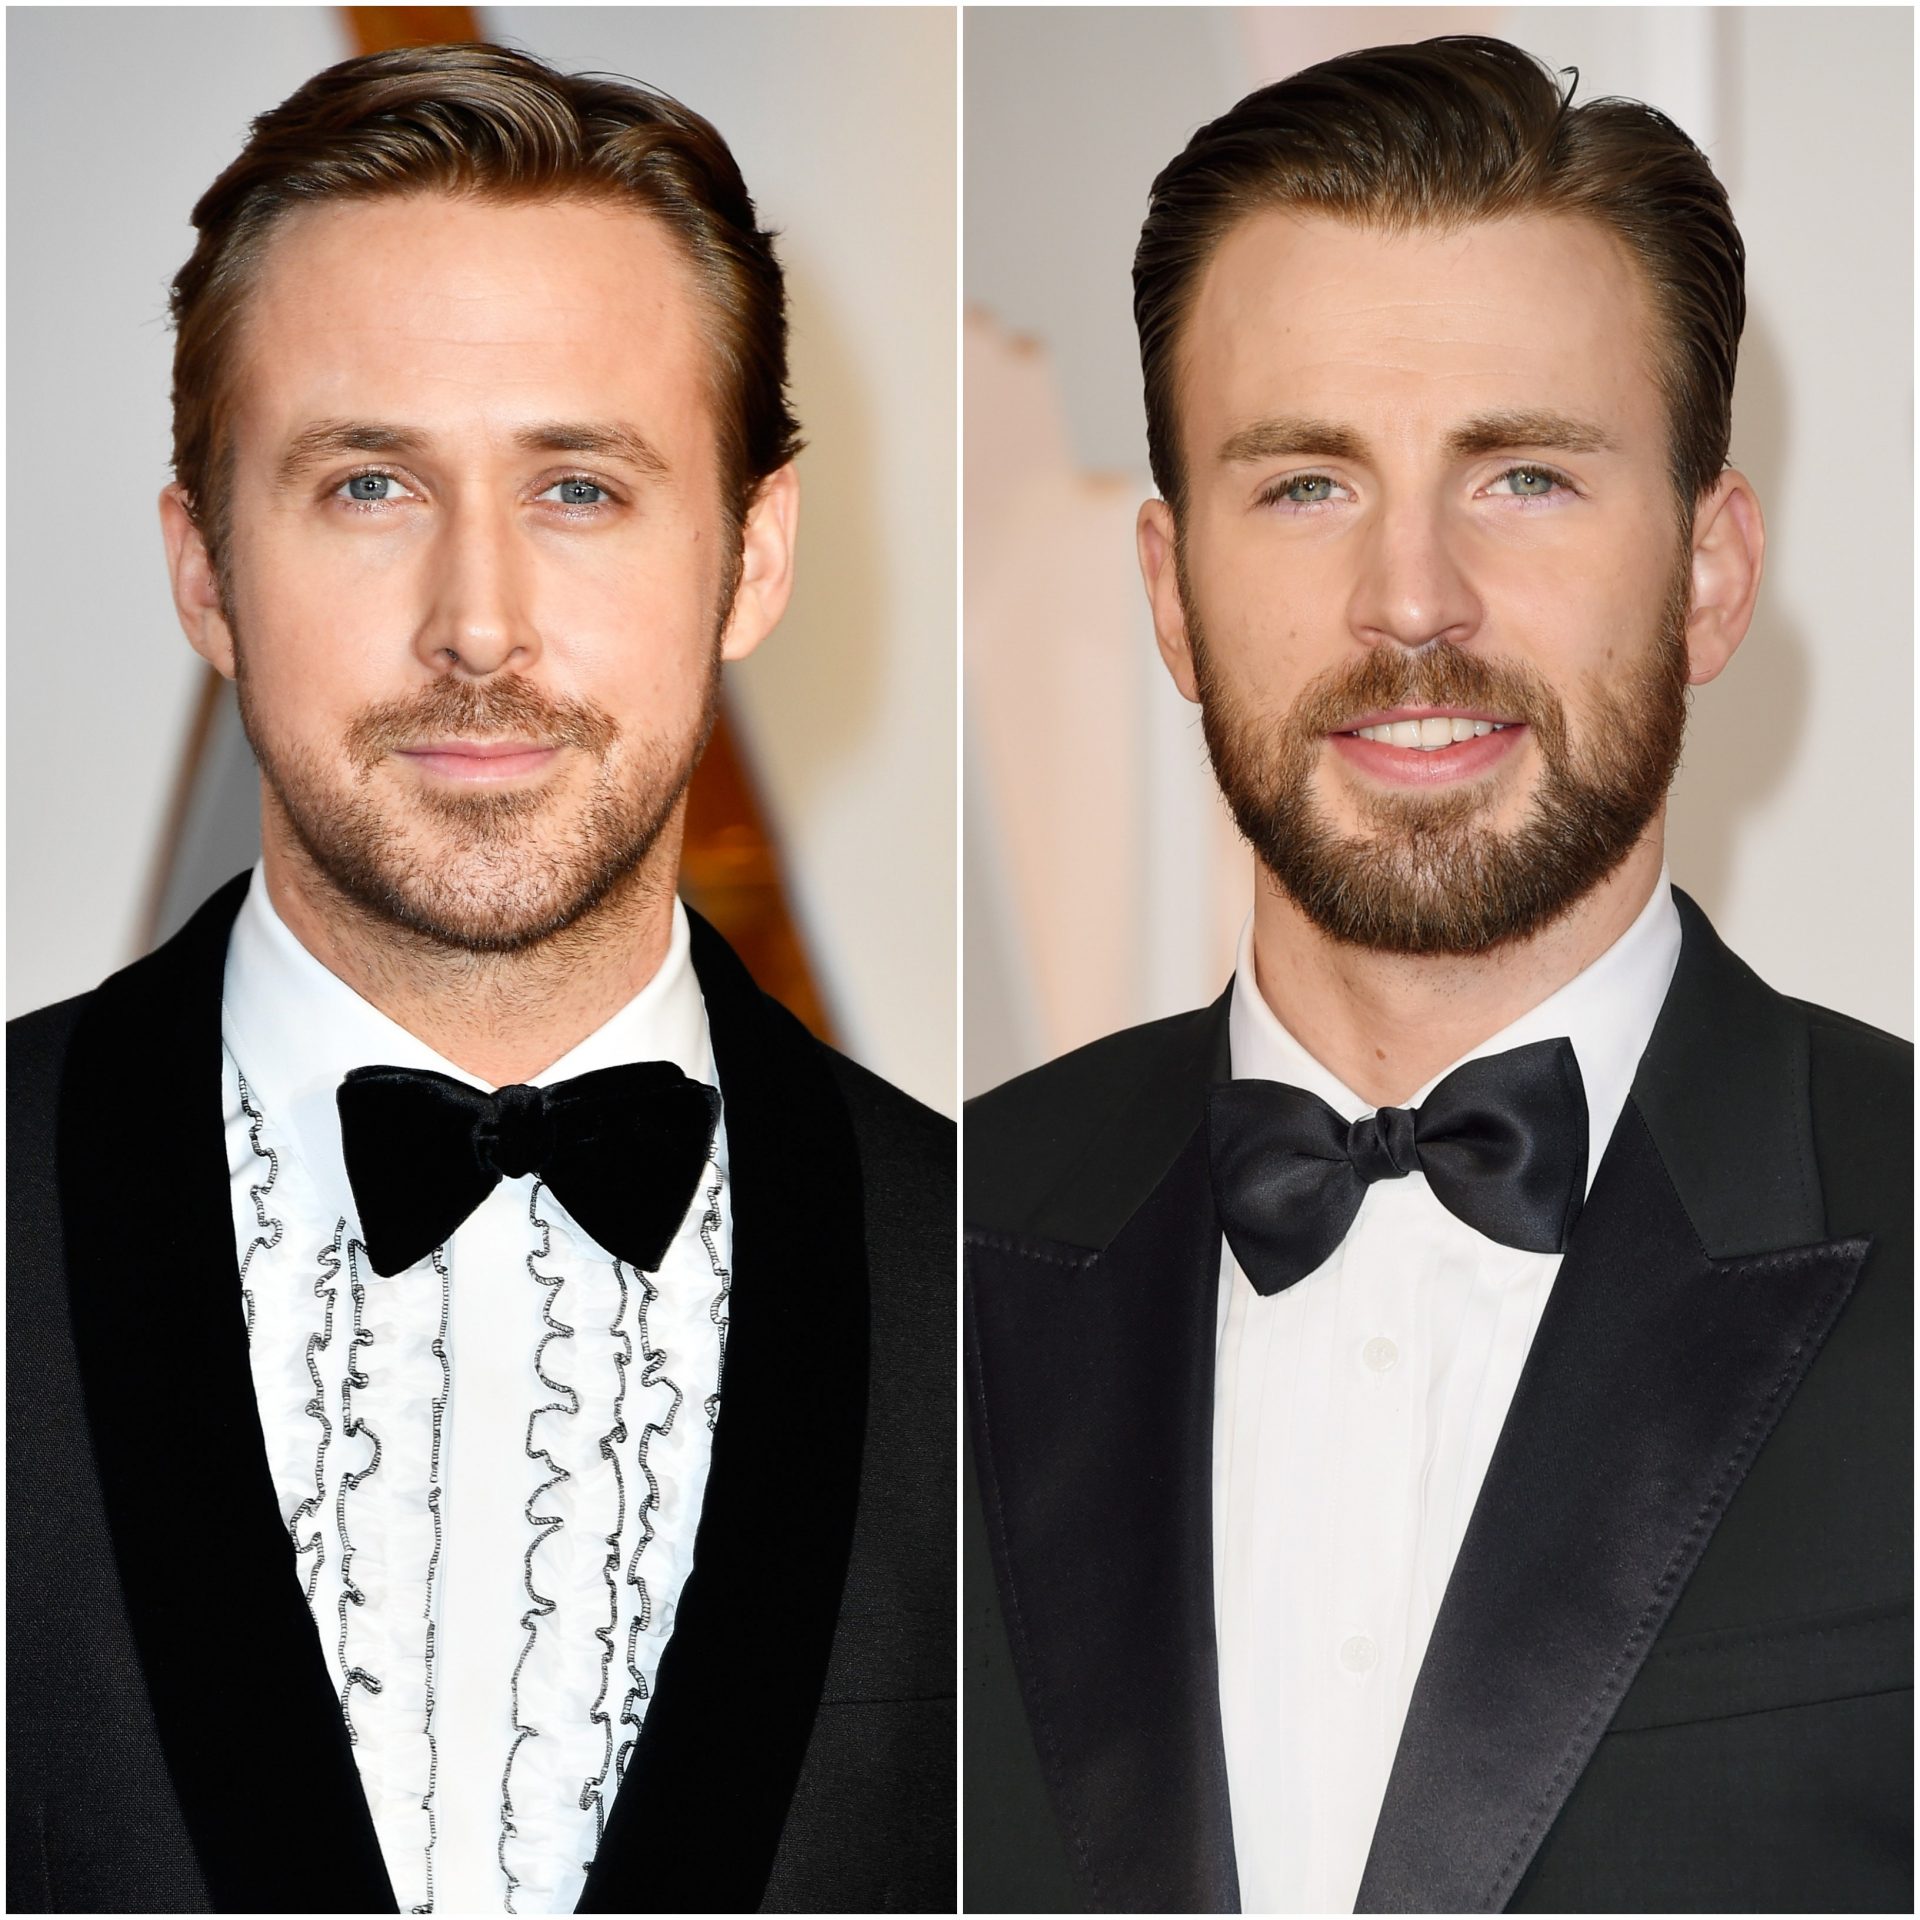 Ryan Gosling and Chris Evans Are Starring In a Netflix Witness Film—And Twitter Is Reacting Accordingly